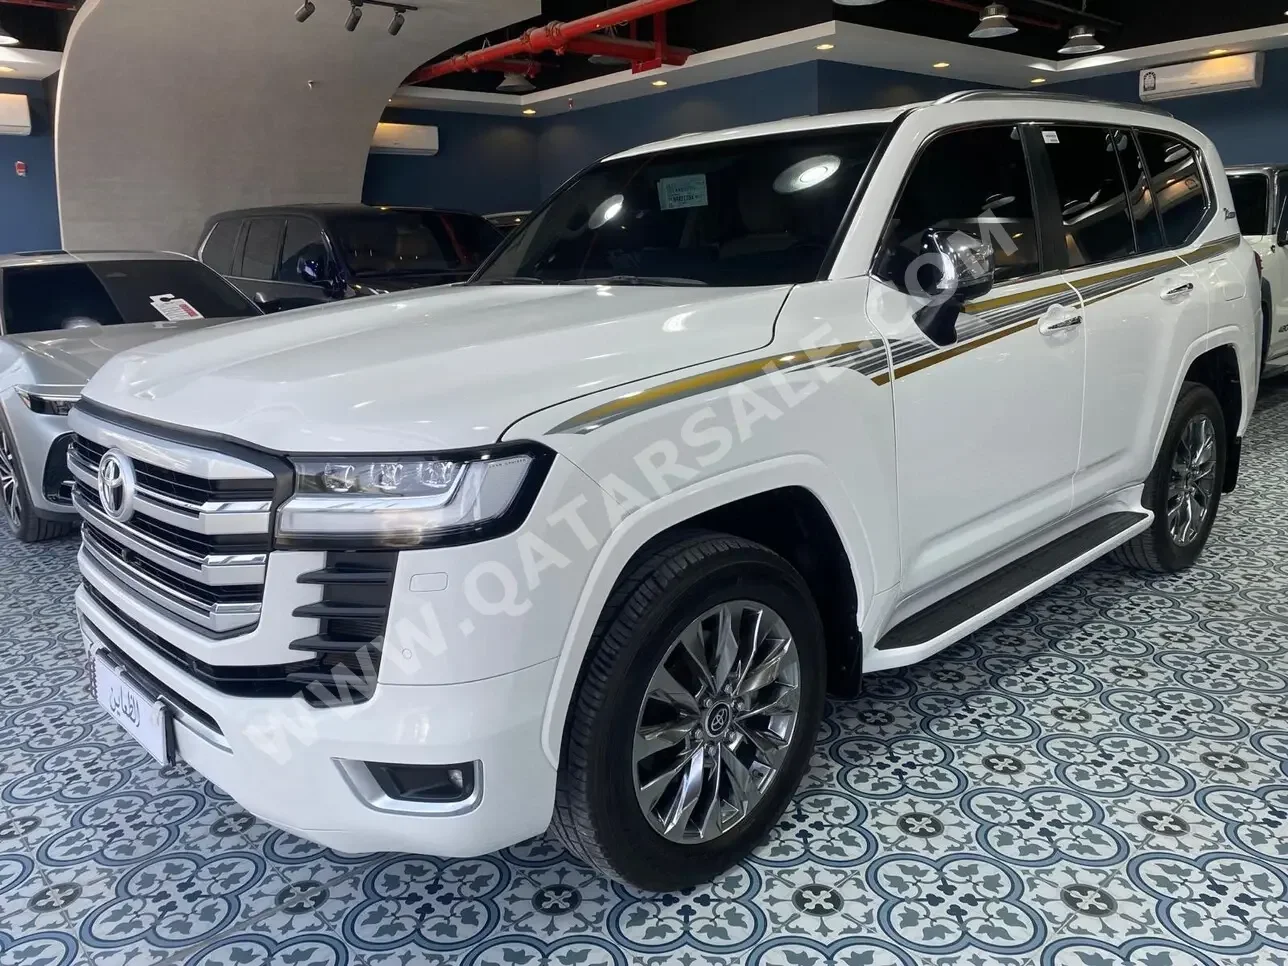 Toyota  Land Cruiser  VX Twin Turbo  2022  Automatic  39,000 Km  6 Cylinder  Four Wheel Drive (4WD)  SUV  White  With Warranty